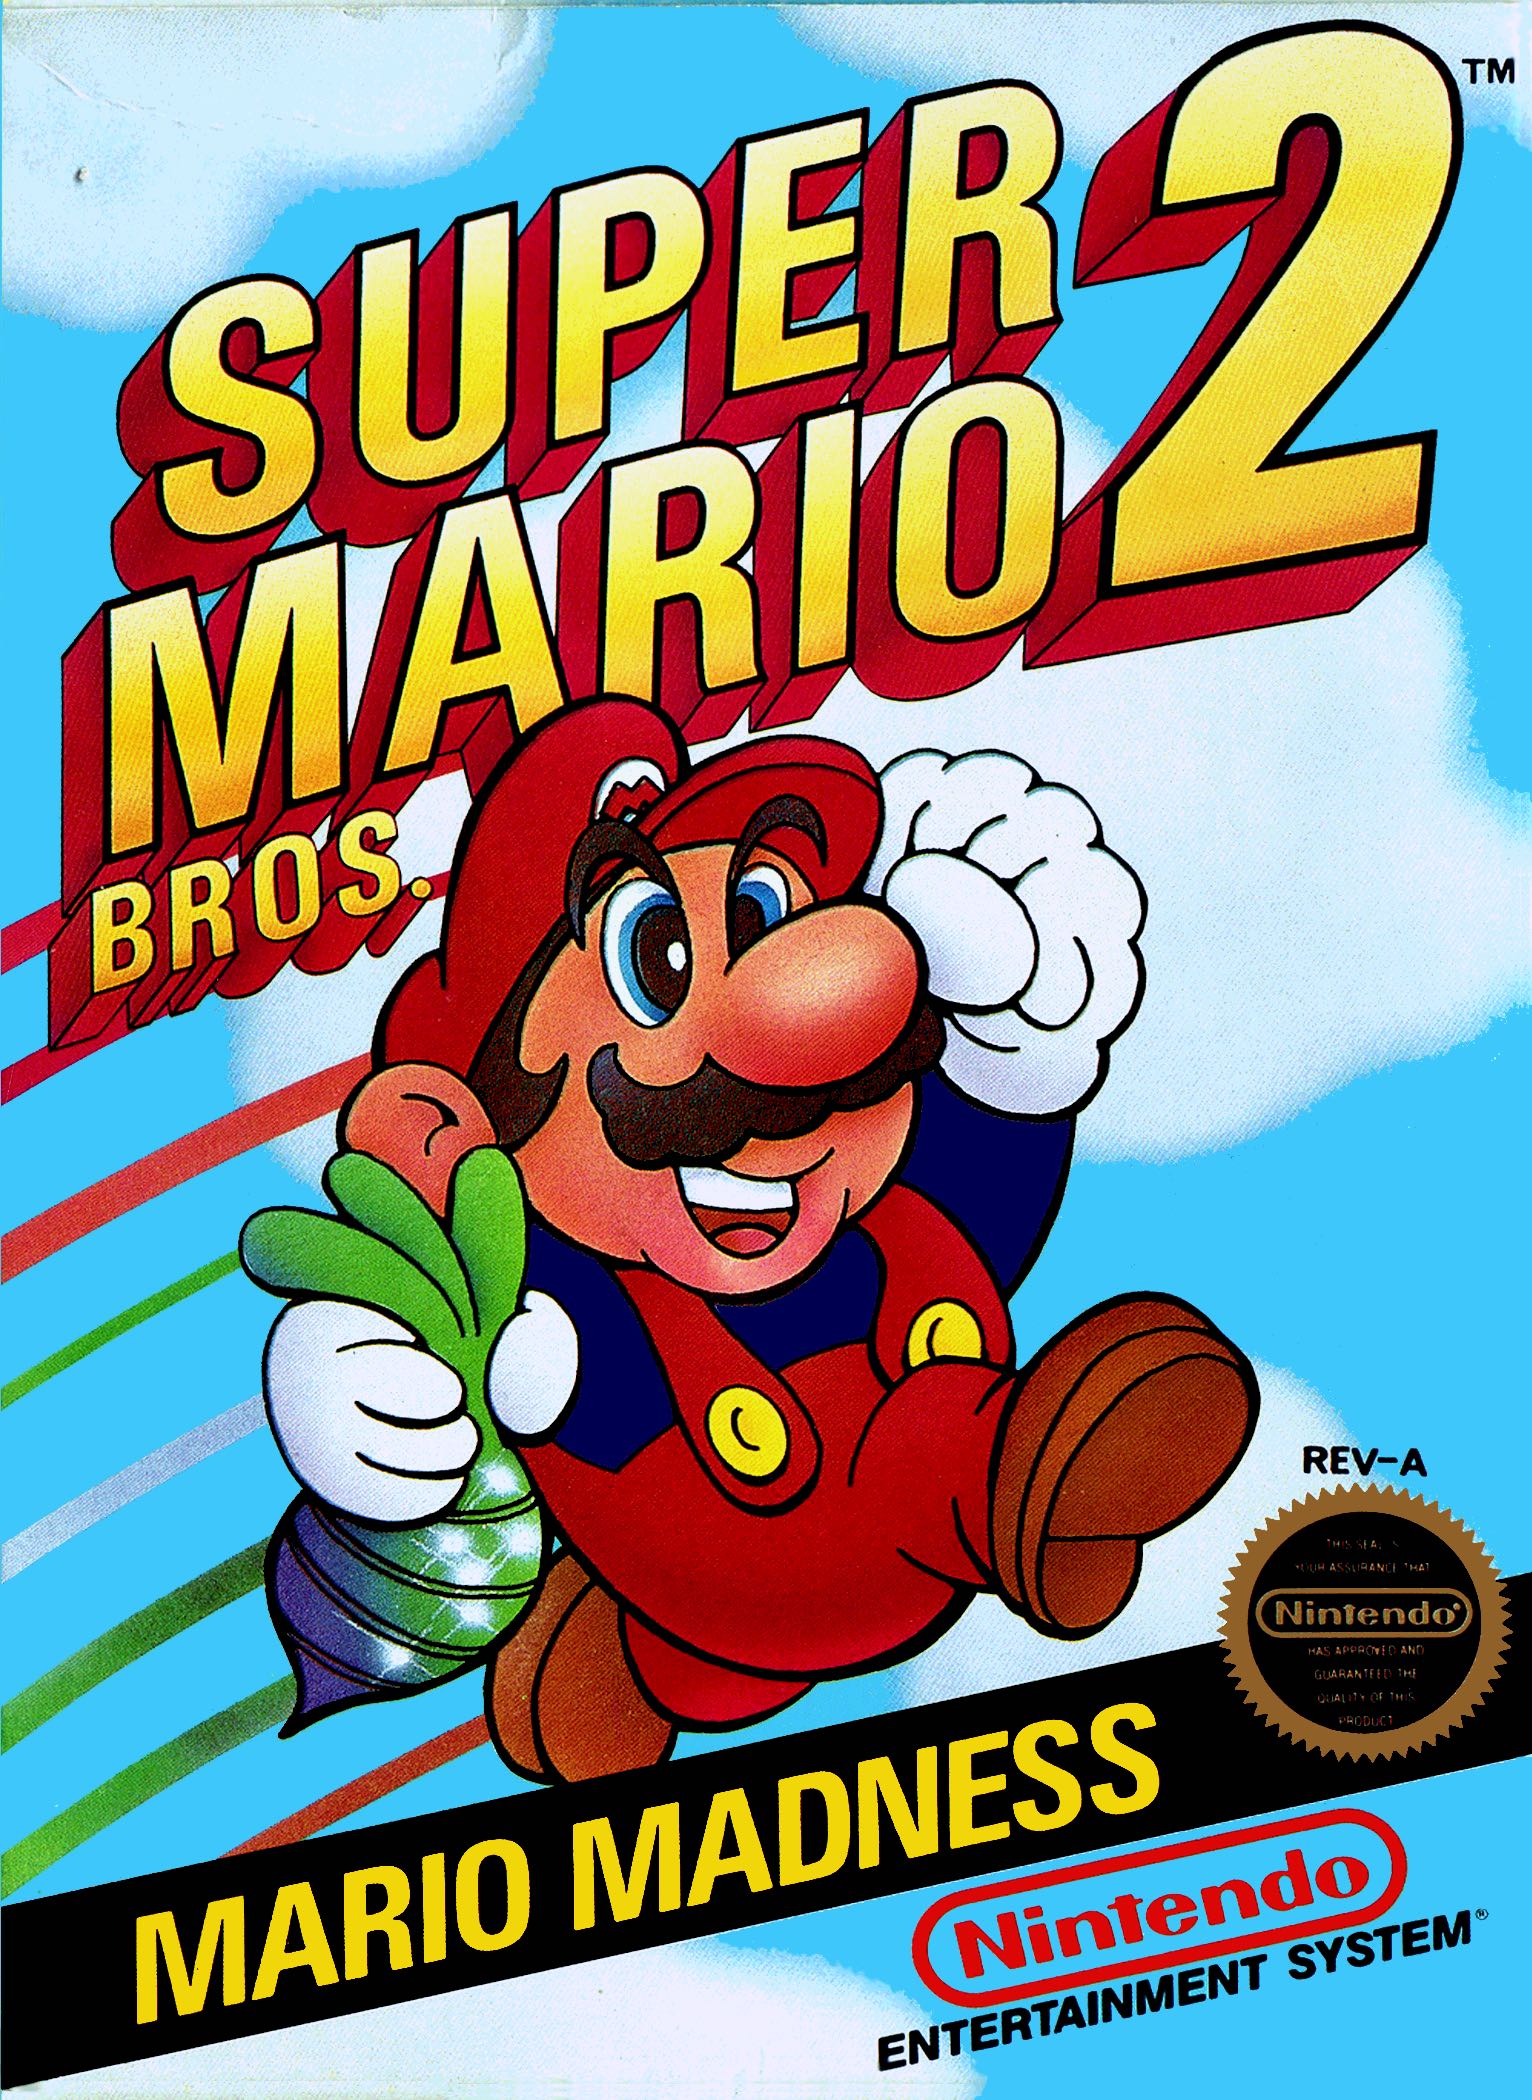 New Super Mario Bros. 2 Art Brings Back Old Favourites